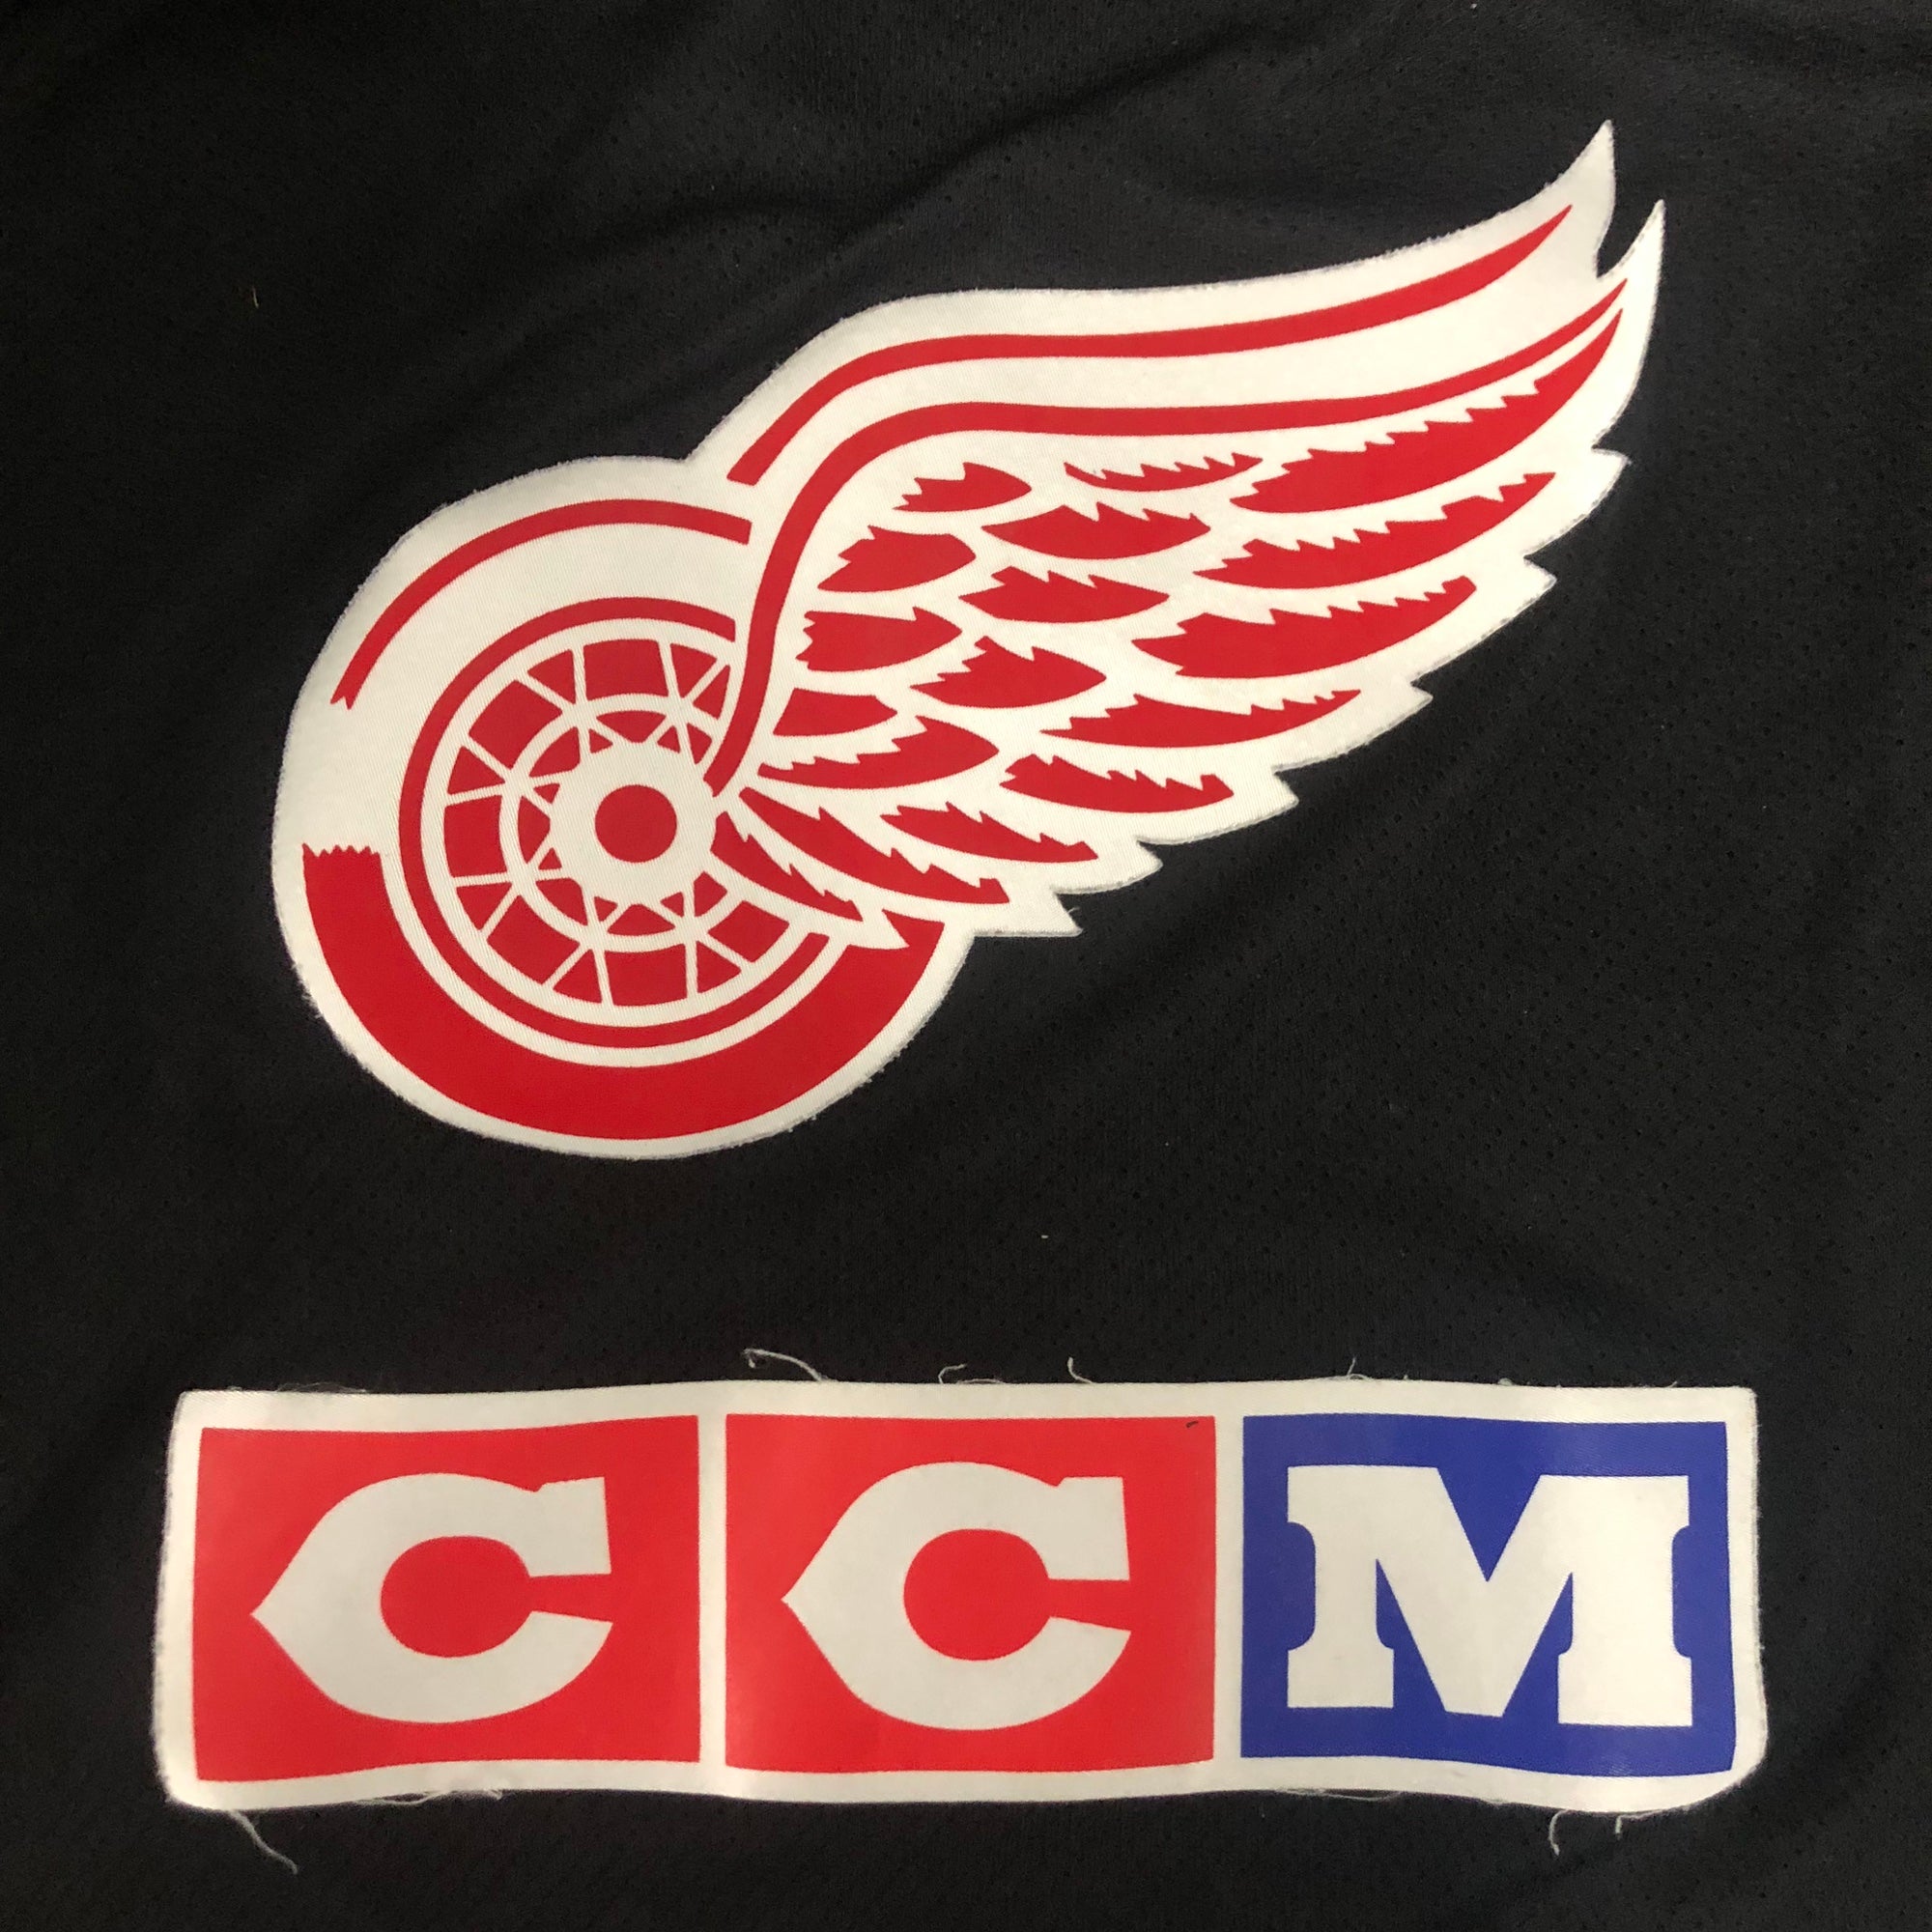 Detroit Red Wings Vintage Replica Jersey 1926 (Away) - CCM